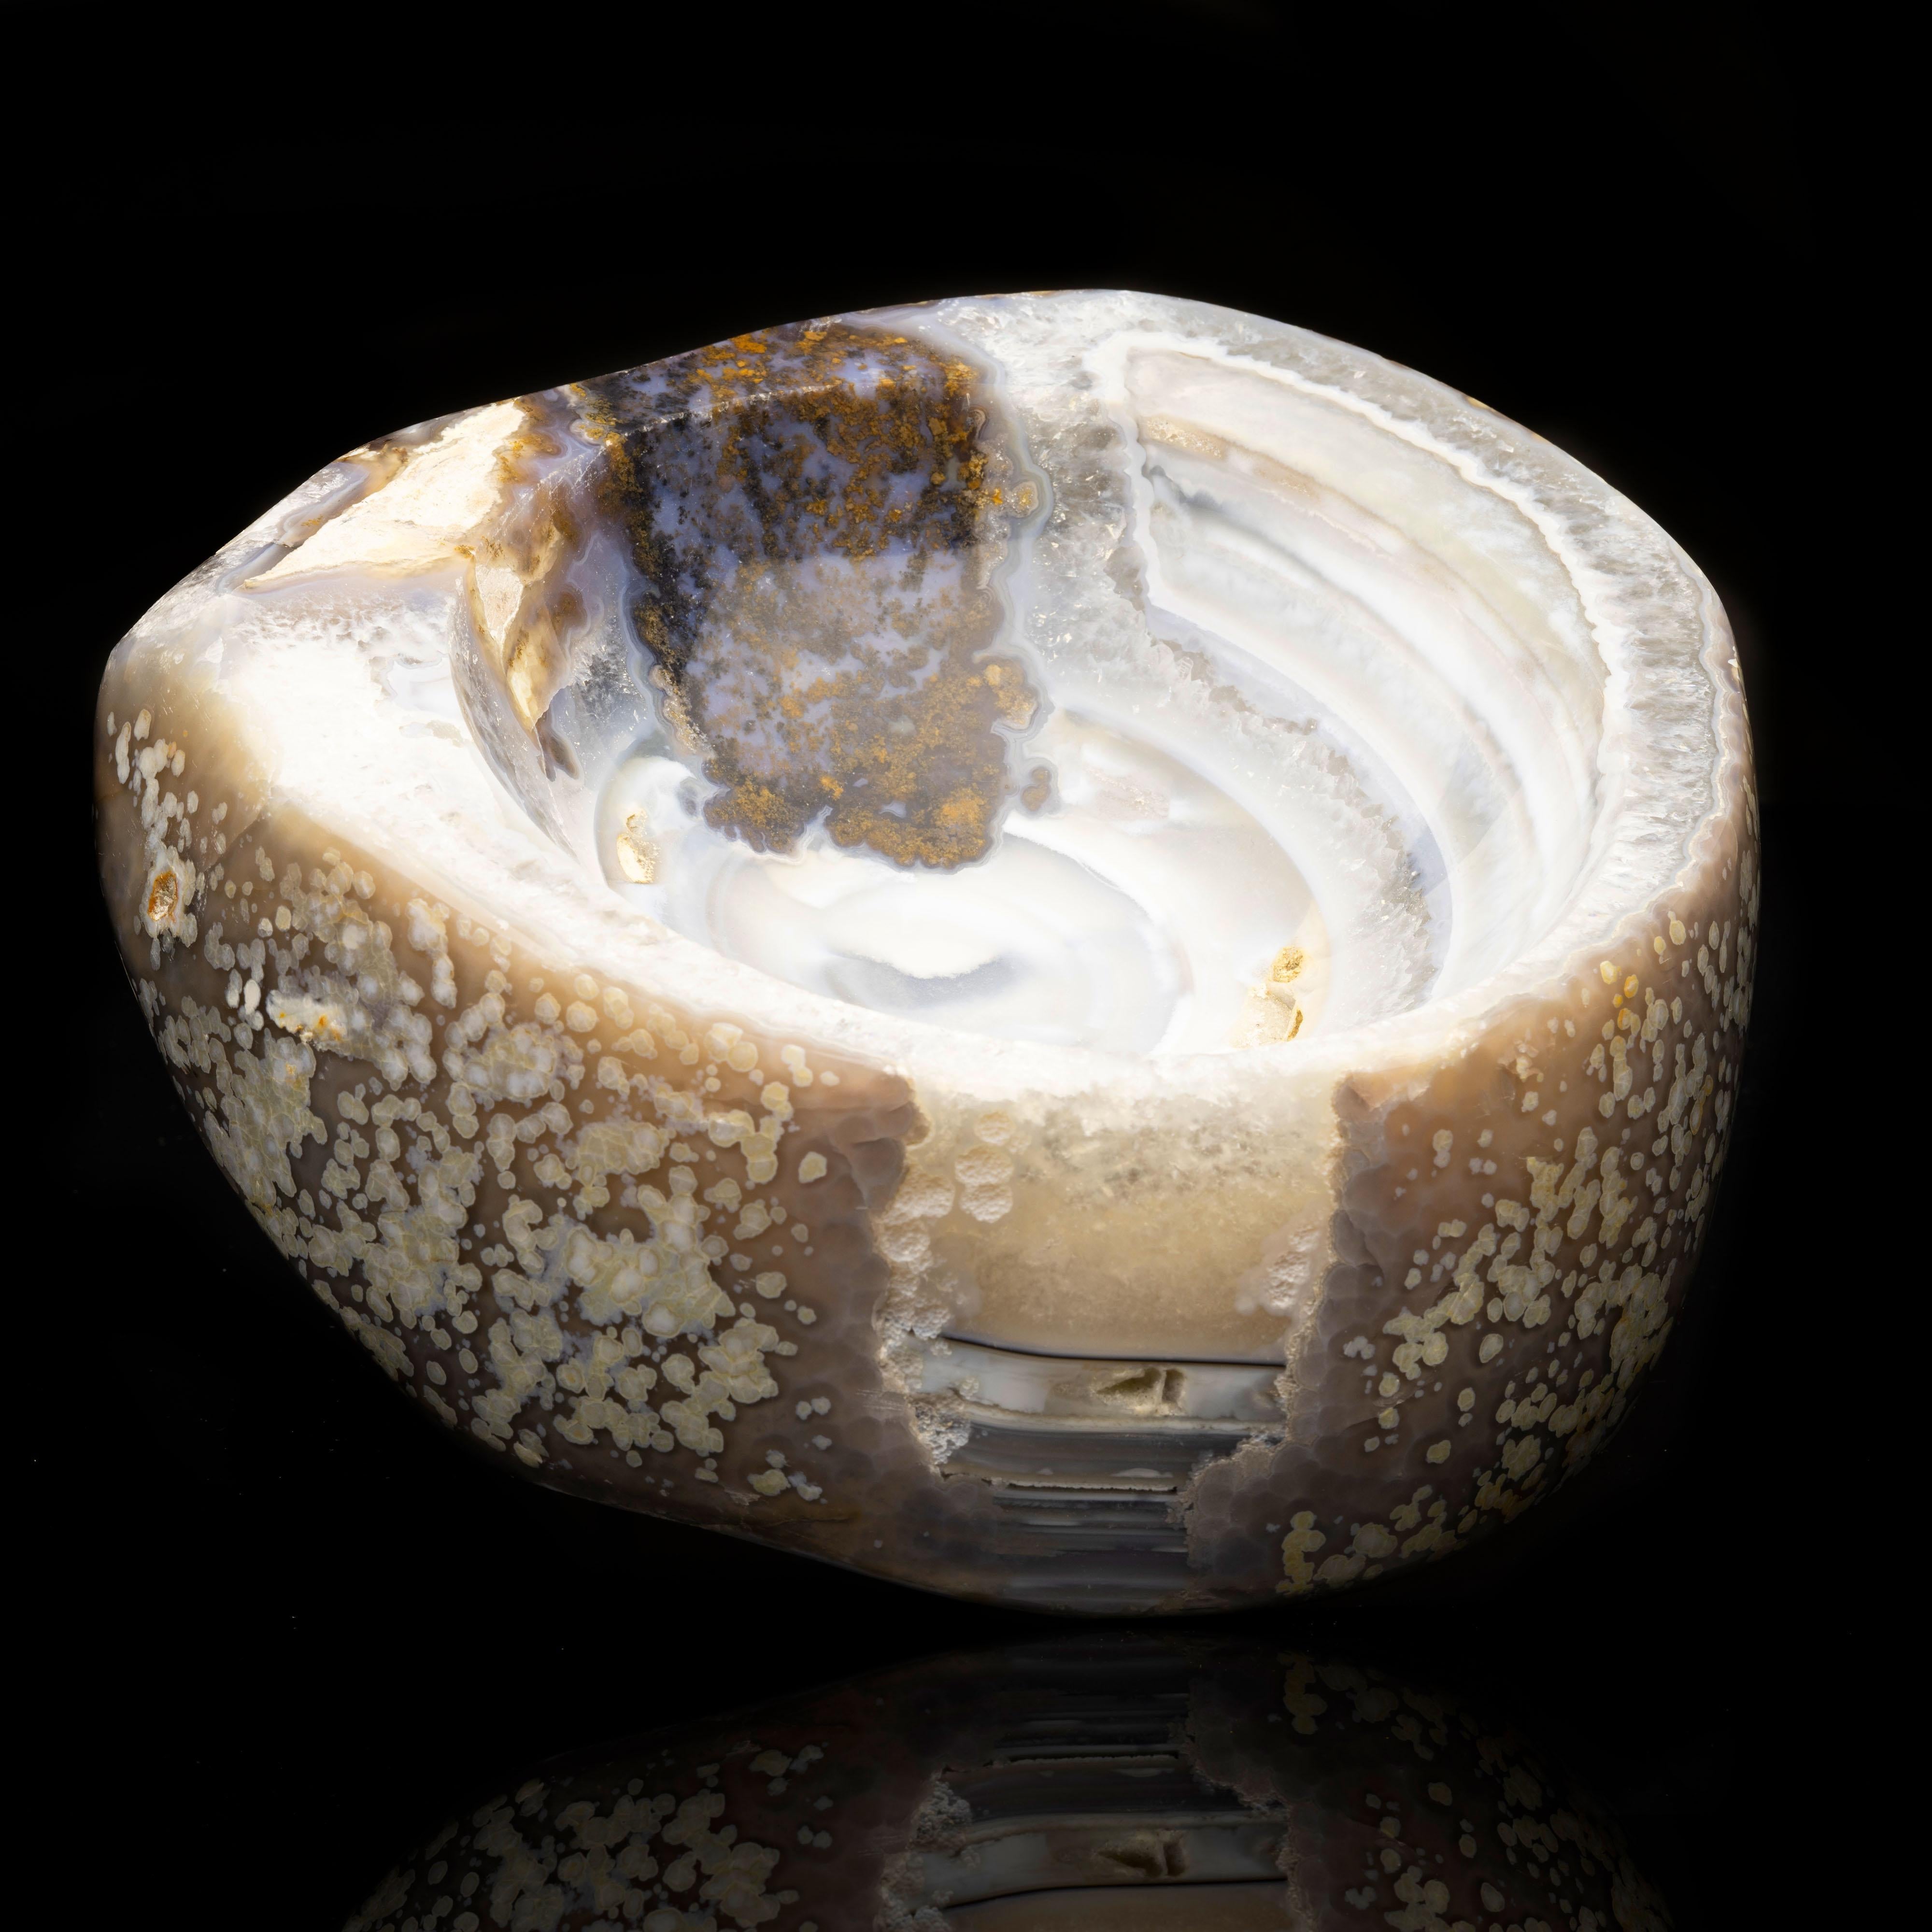 This handsome deep bowl has been hand-carved and hand-polished out of one piece of genuine agate and features concentric blue-gray banding run through with quartz for a beautiful contrast in translucency and texture. The exterior of the bowl is a